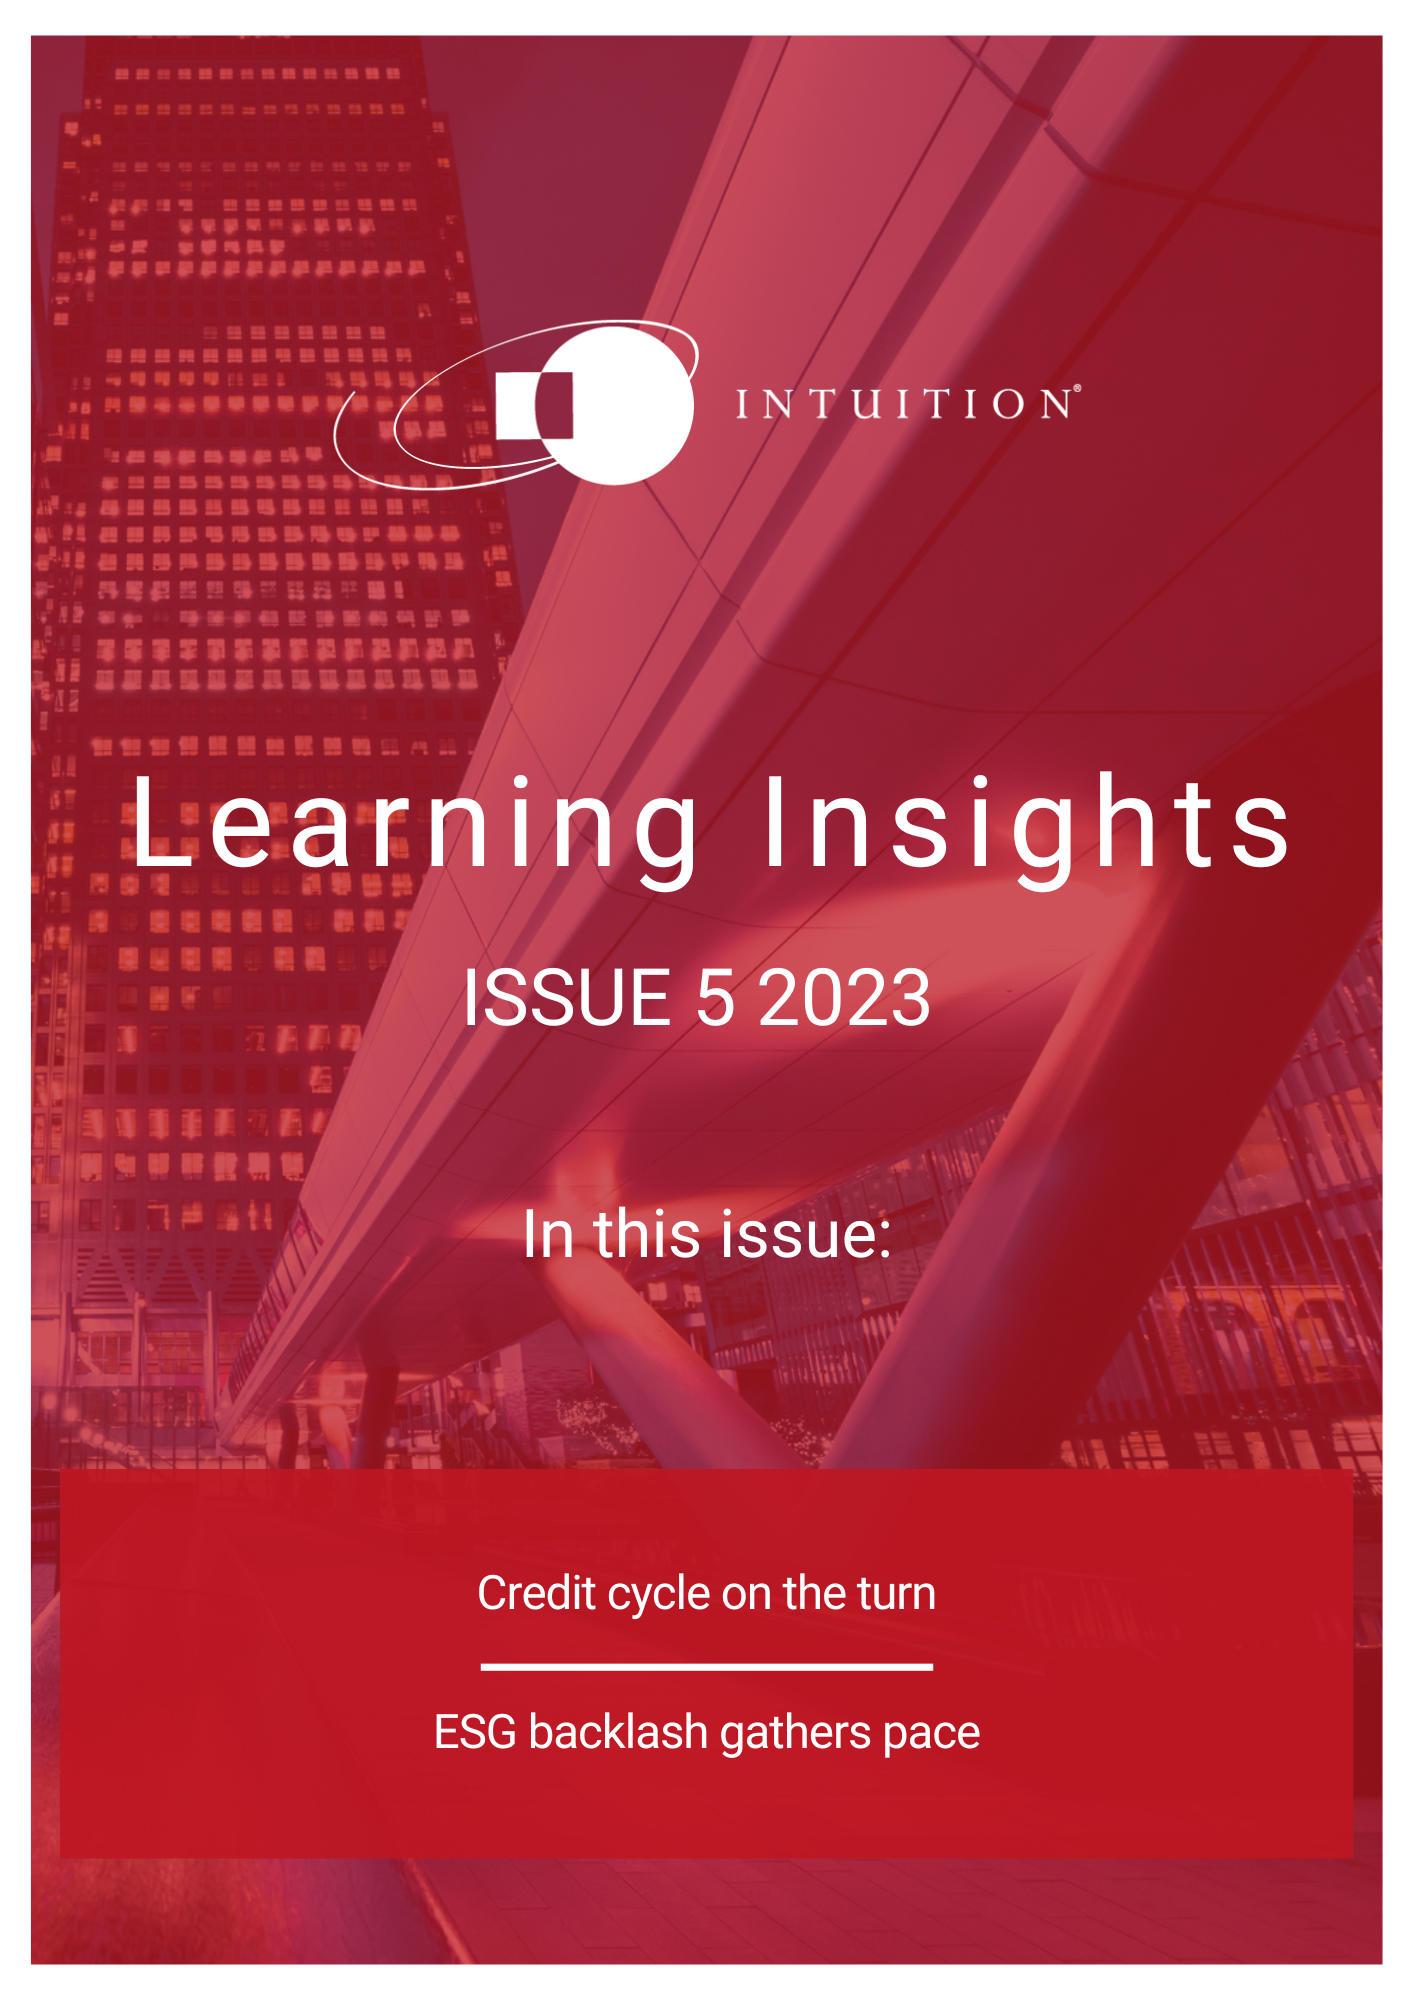 Learning Insights Issue 5 2023